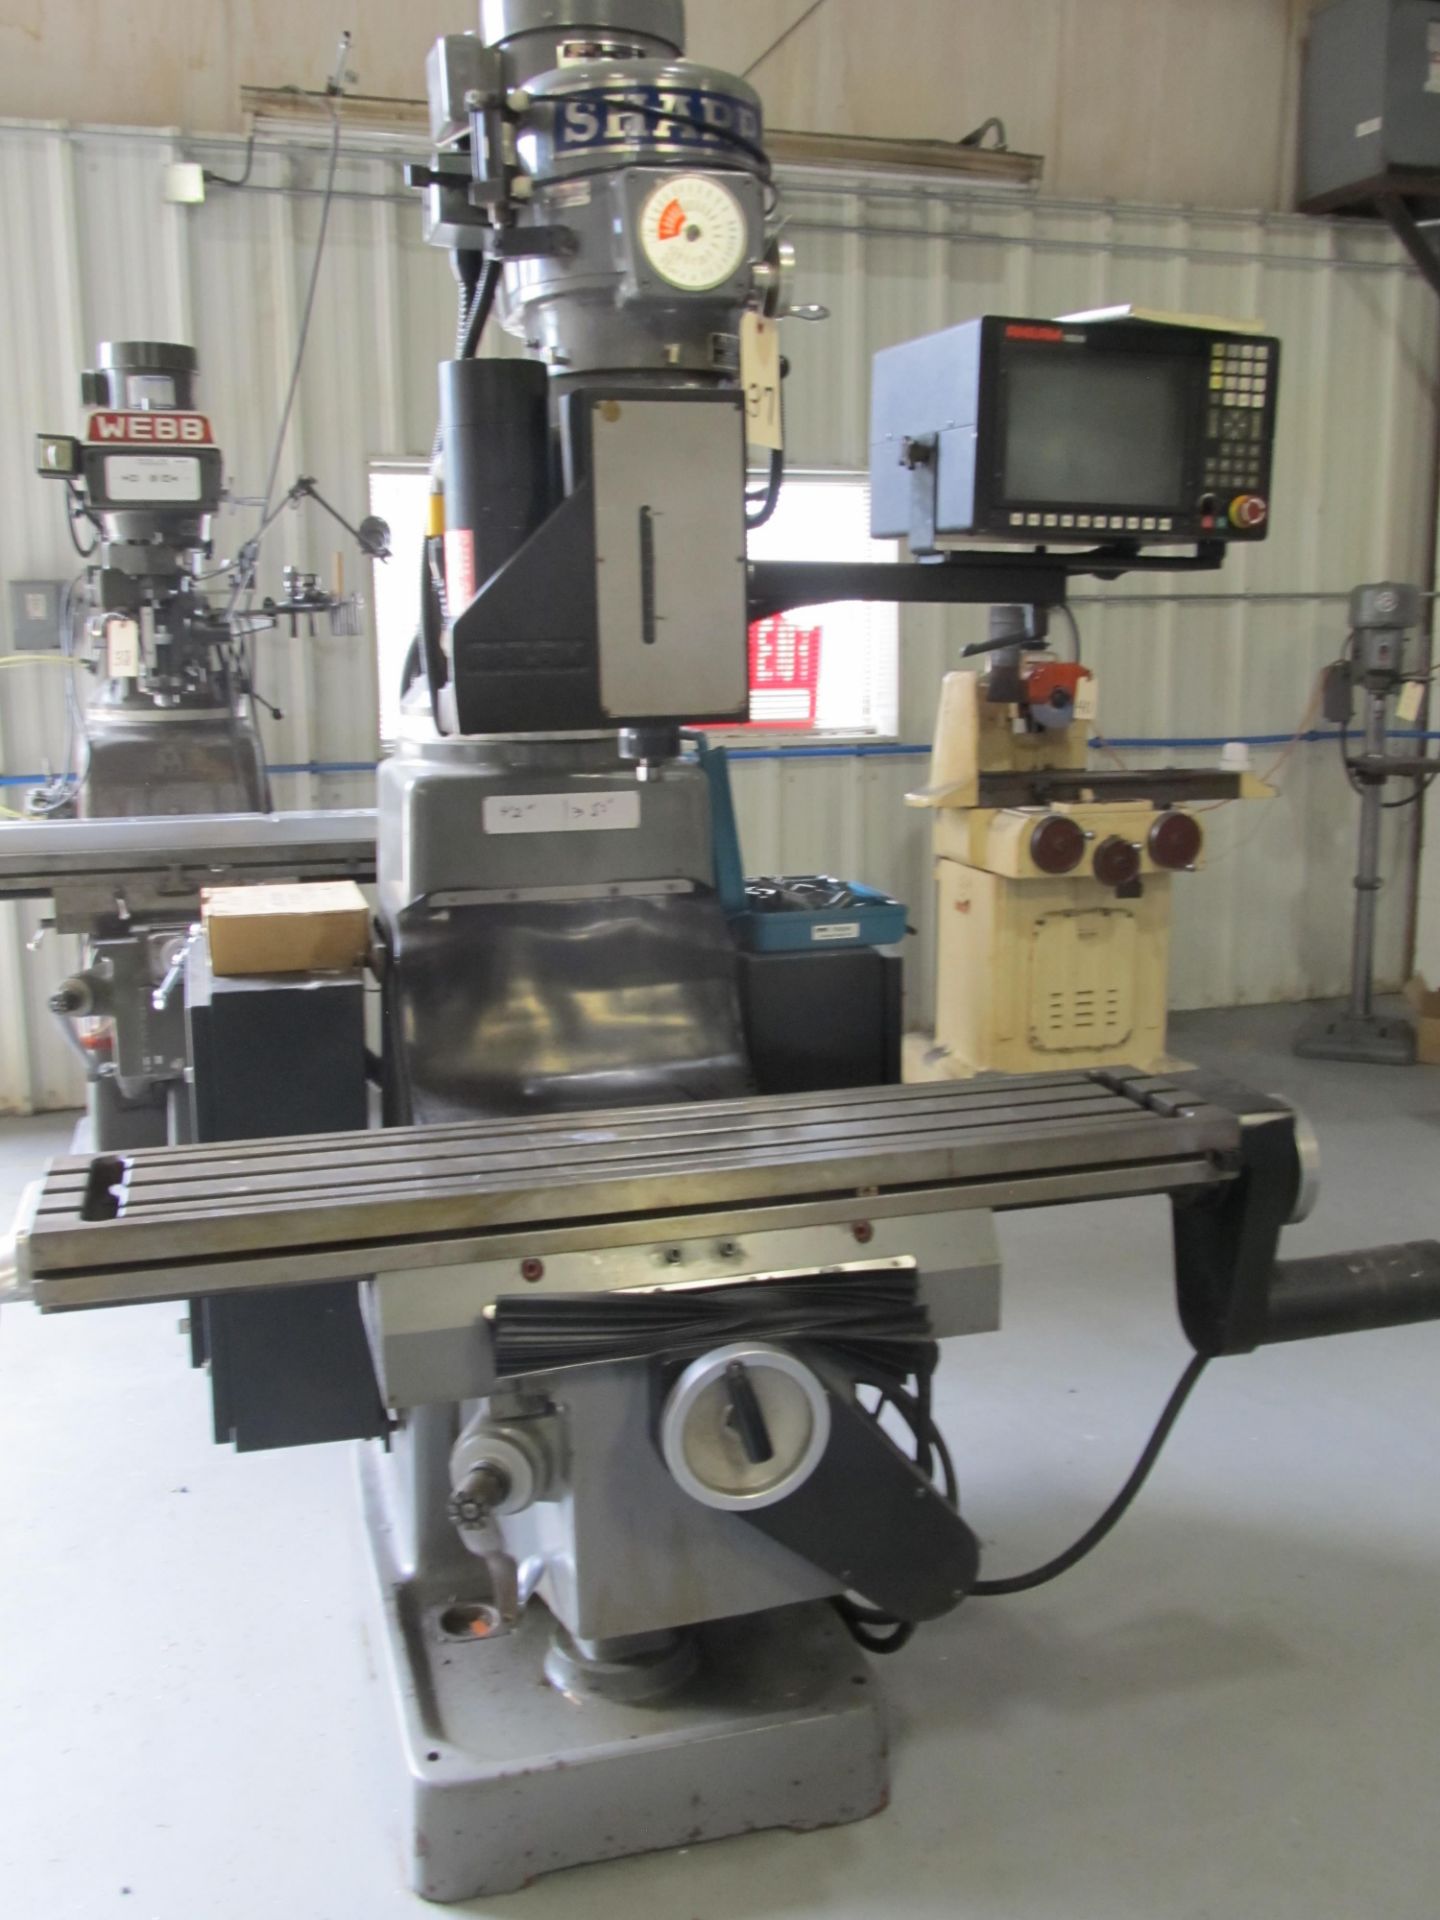 Sharp 3-Axis Milling Machine w/ Knee Type 10" x 50" Table - Image 2 of 8